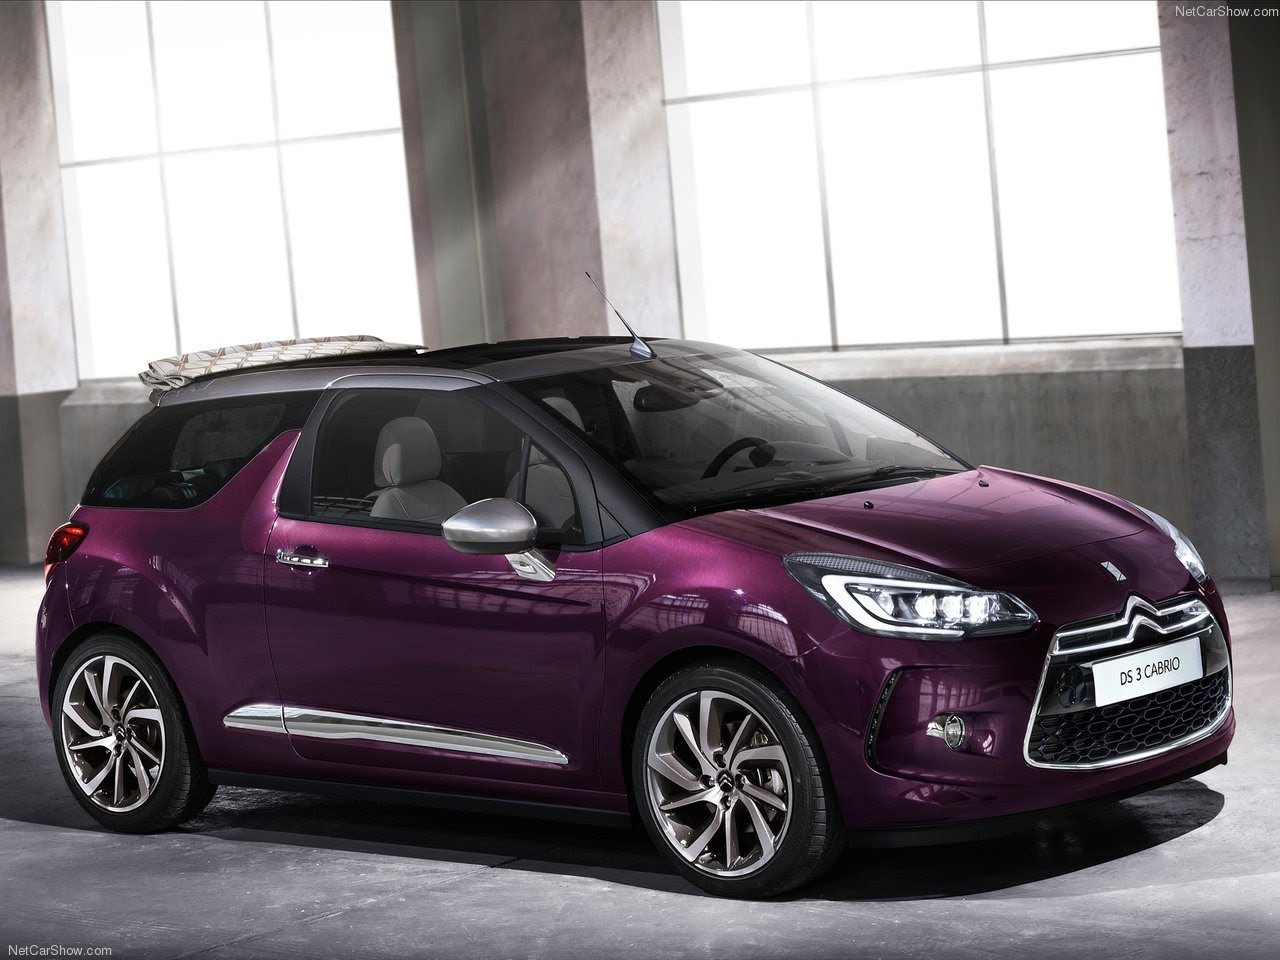 DS 3 2015 - 2016 Cabriolet #7